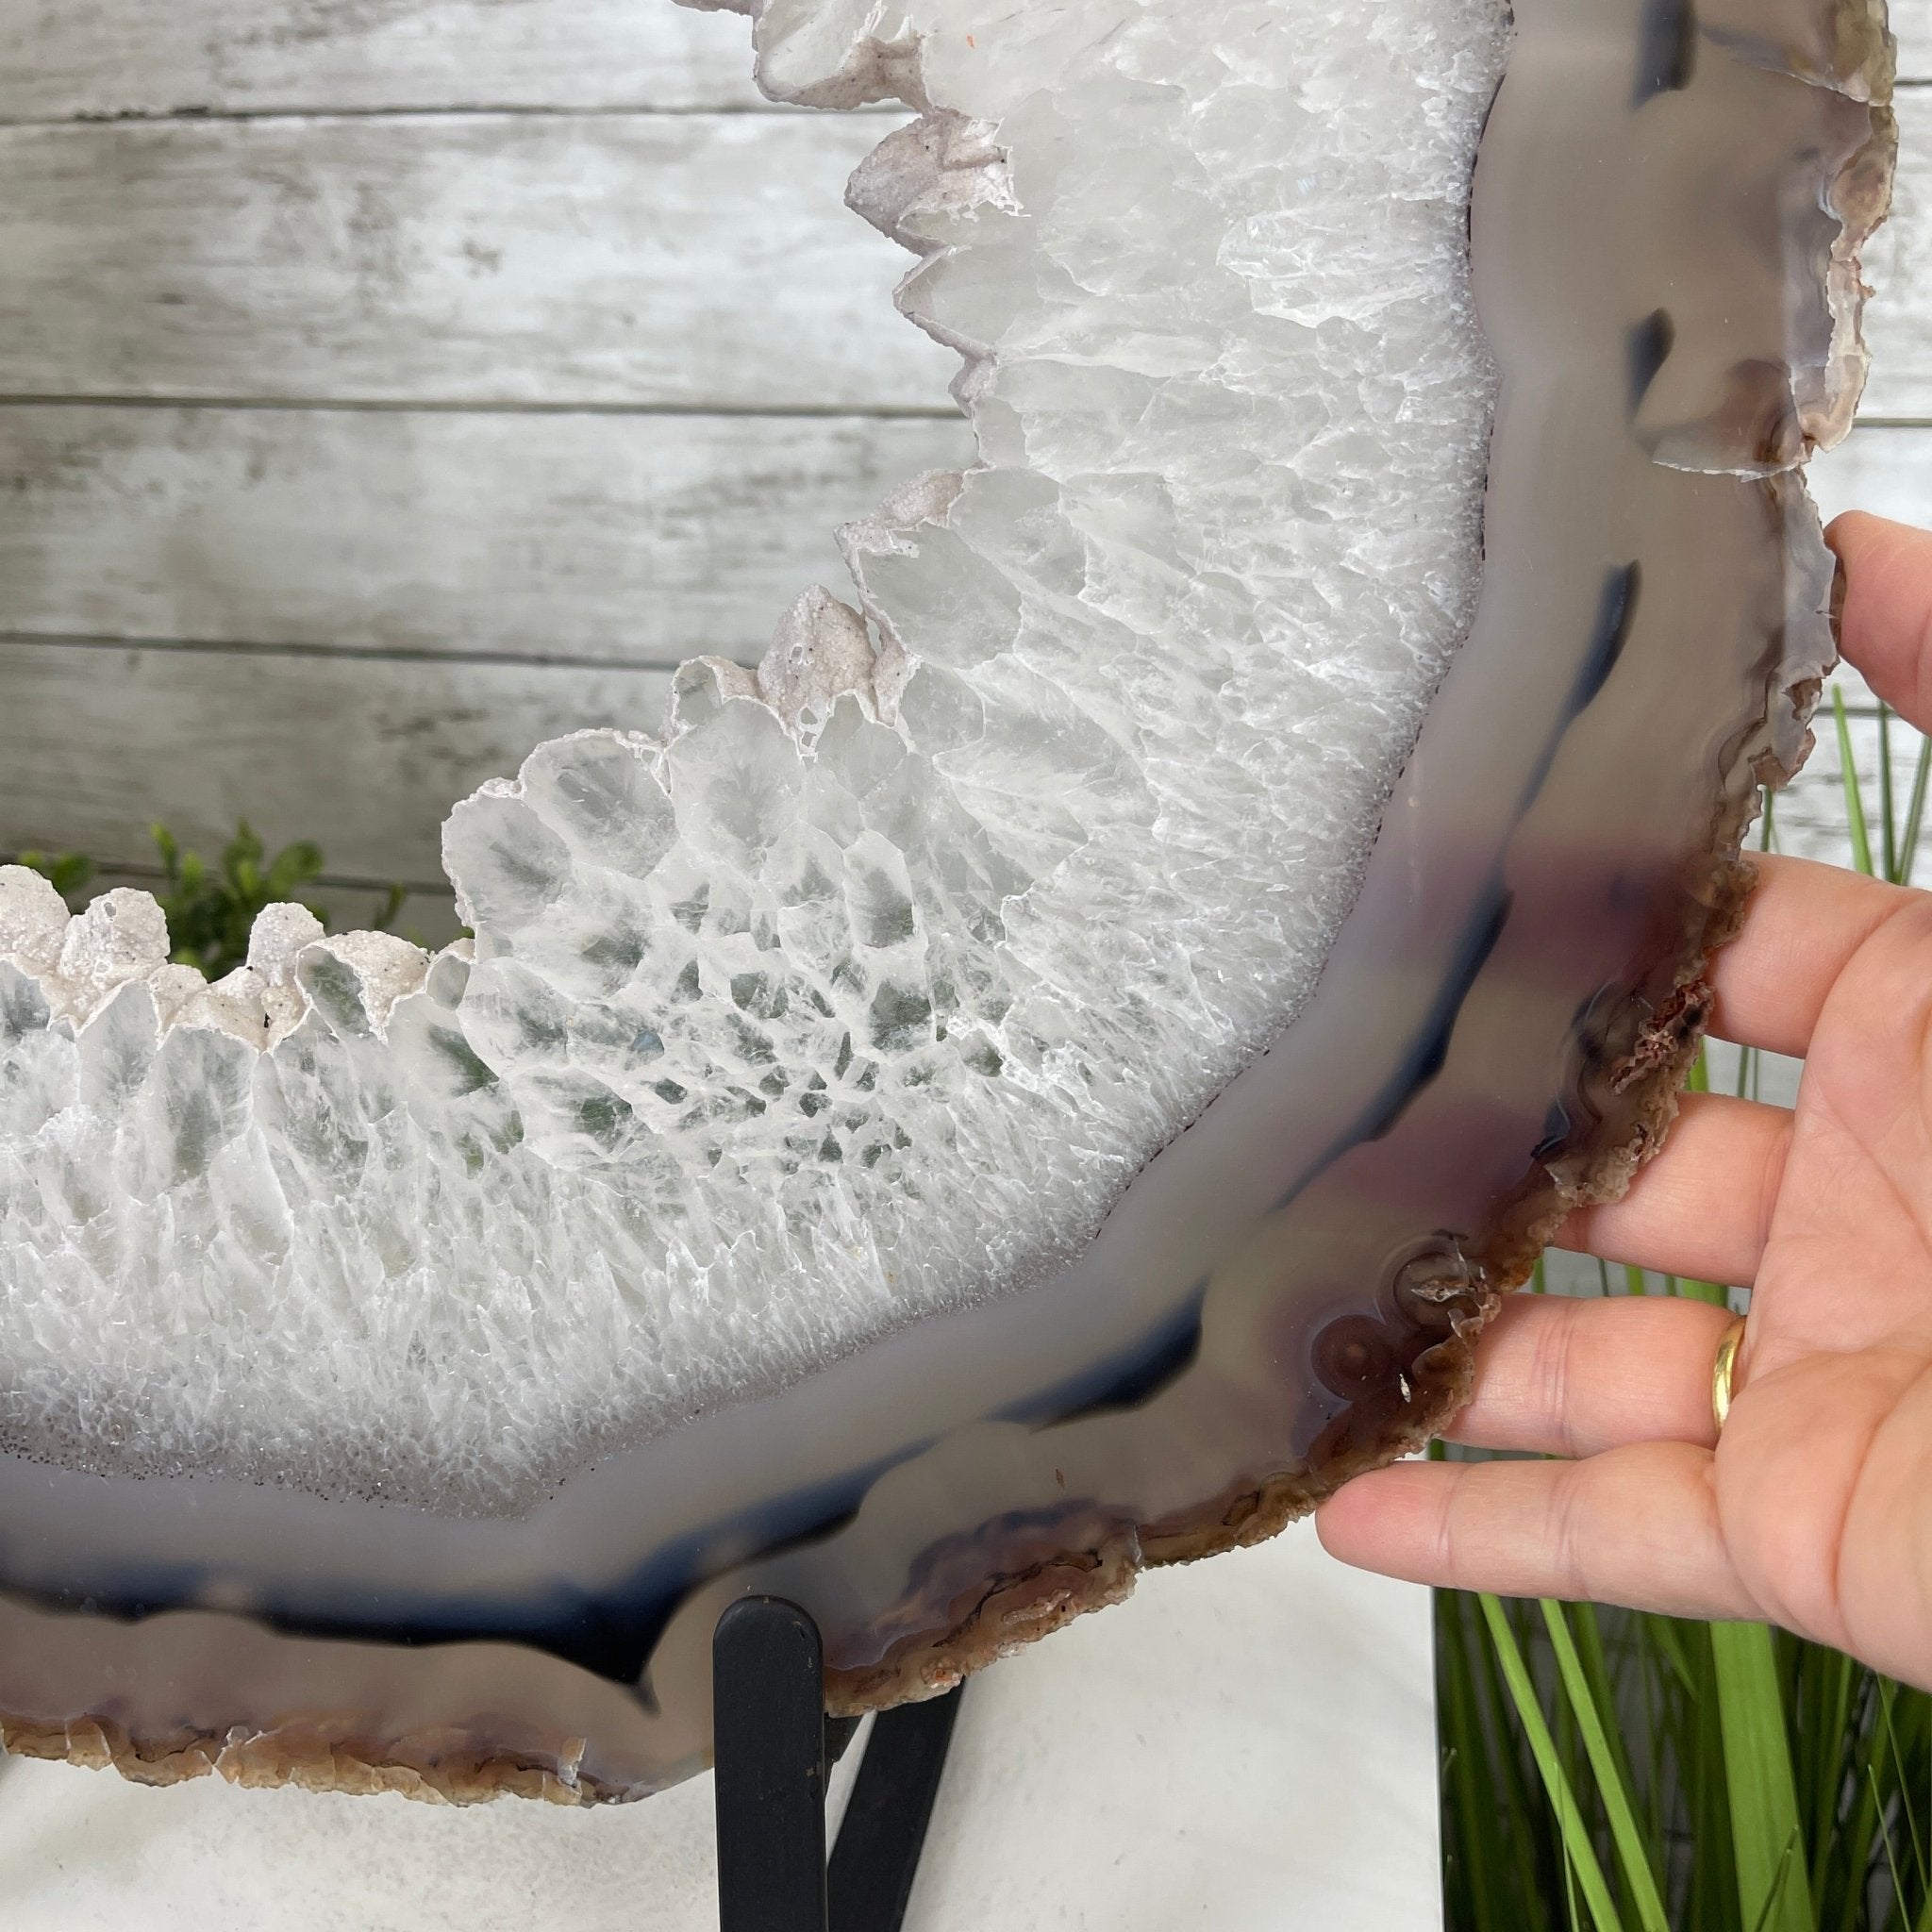 Special Large Natural Brazilian Agate Slice on a Metal Stand, 17.8" x 18" Tall Model #5056-0028 by Brazil Gems - Brazil GemsBrazil GemsSpecial Large Natural Brazilian Agate Slice on a Metal Stand, 17.8" x 18" Tall Model #5056-0028 by Brazil GemsSlices on Fixed Bases5056-0028